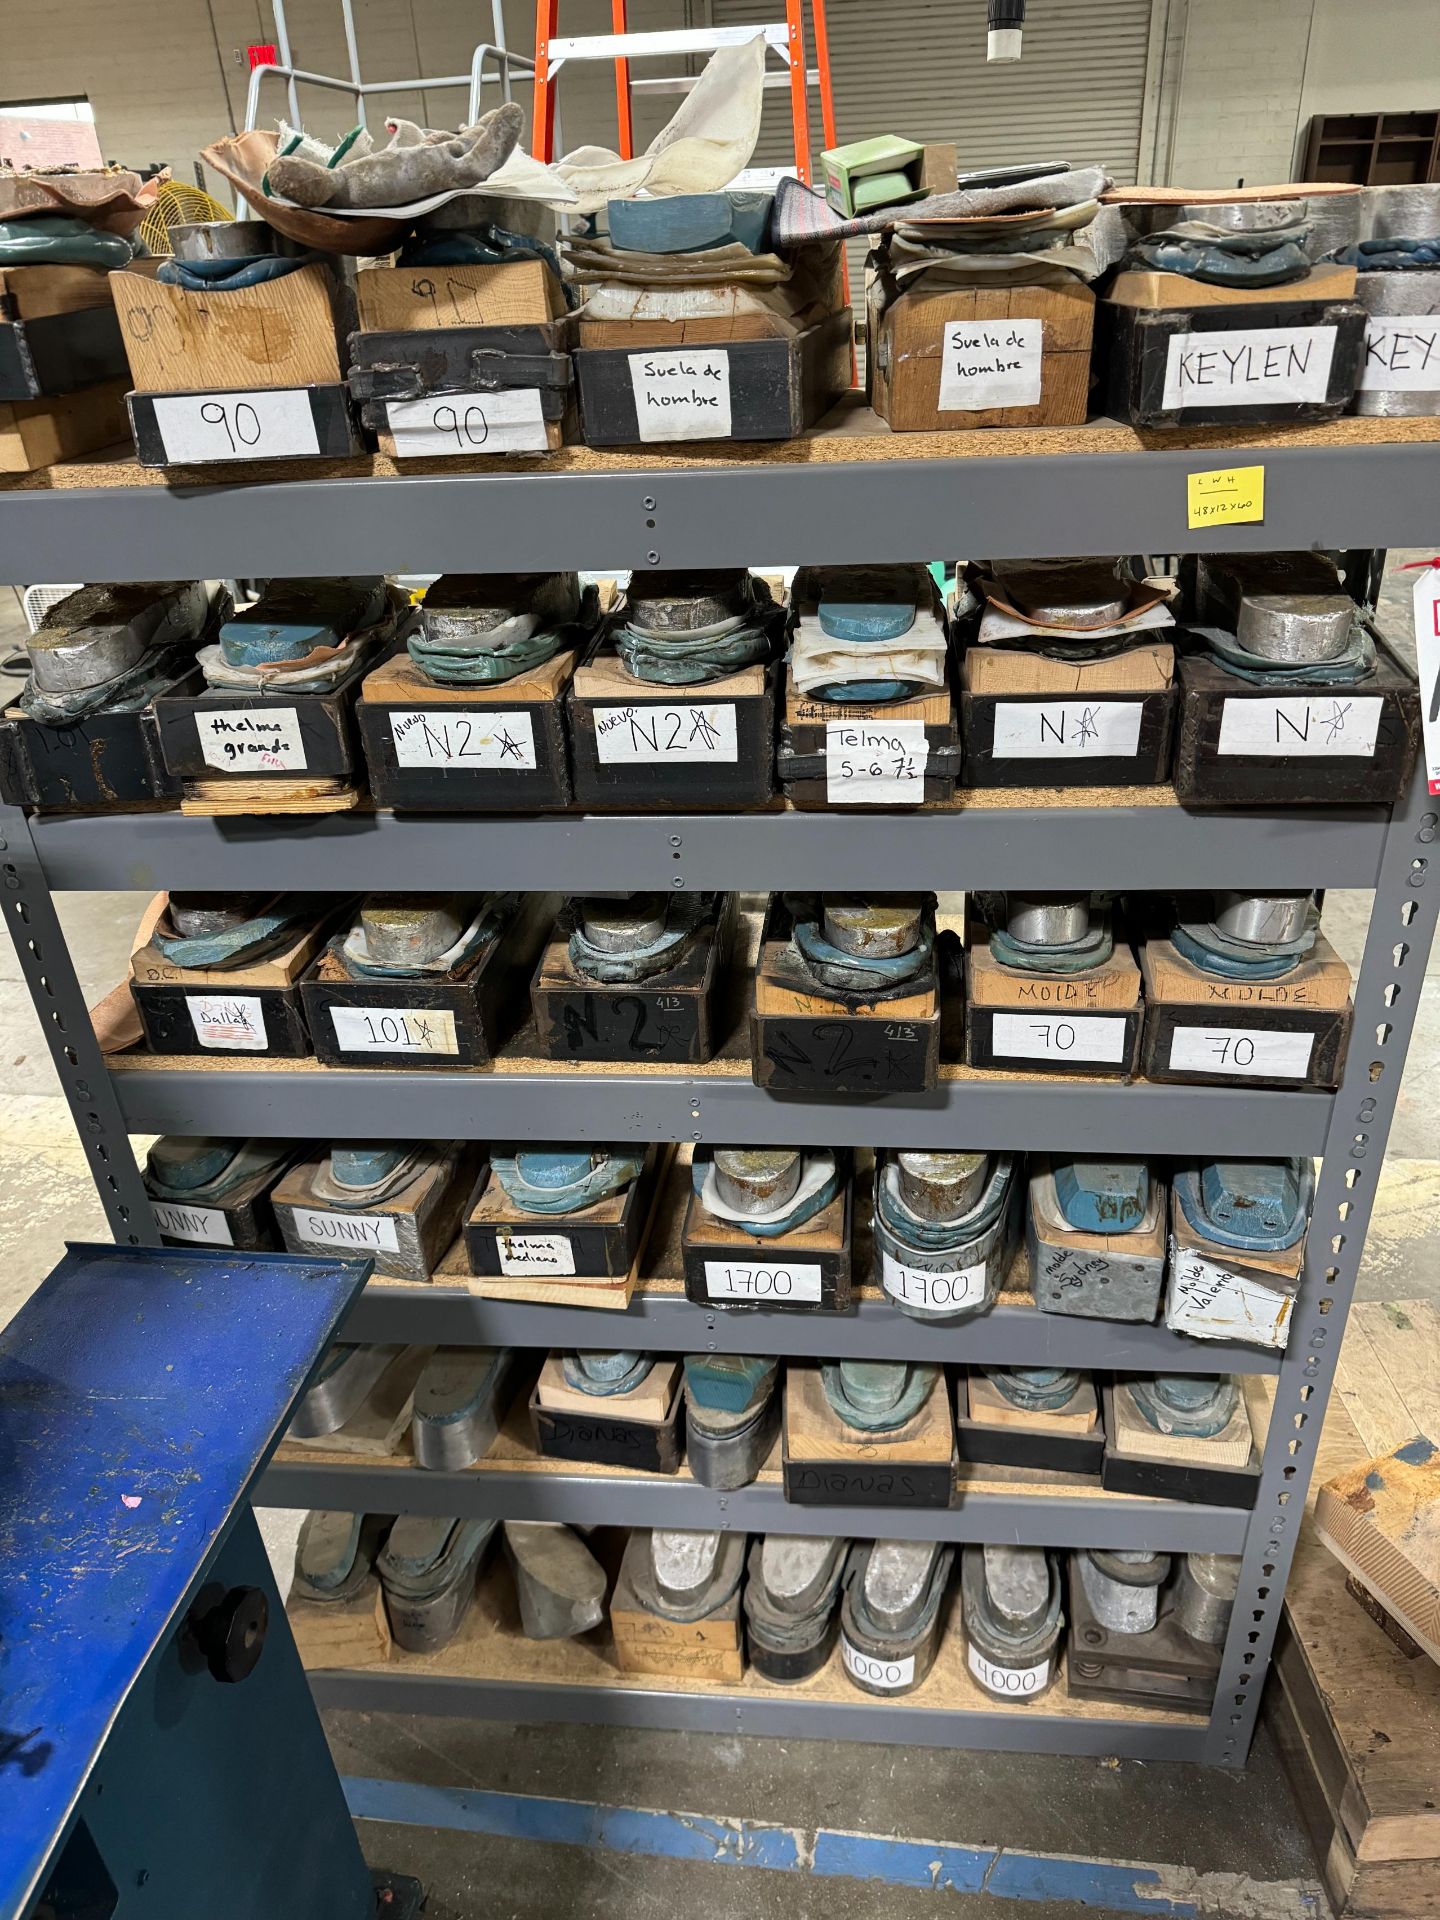 LOT - ULINE SHELVING UNIT, W/ CONTENTS OF OUTSOLE PRESS DIES - Image 2 of 3